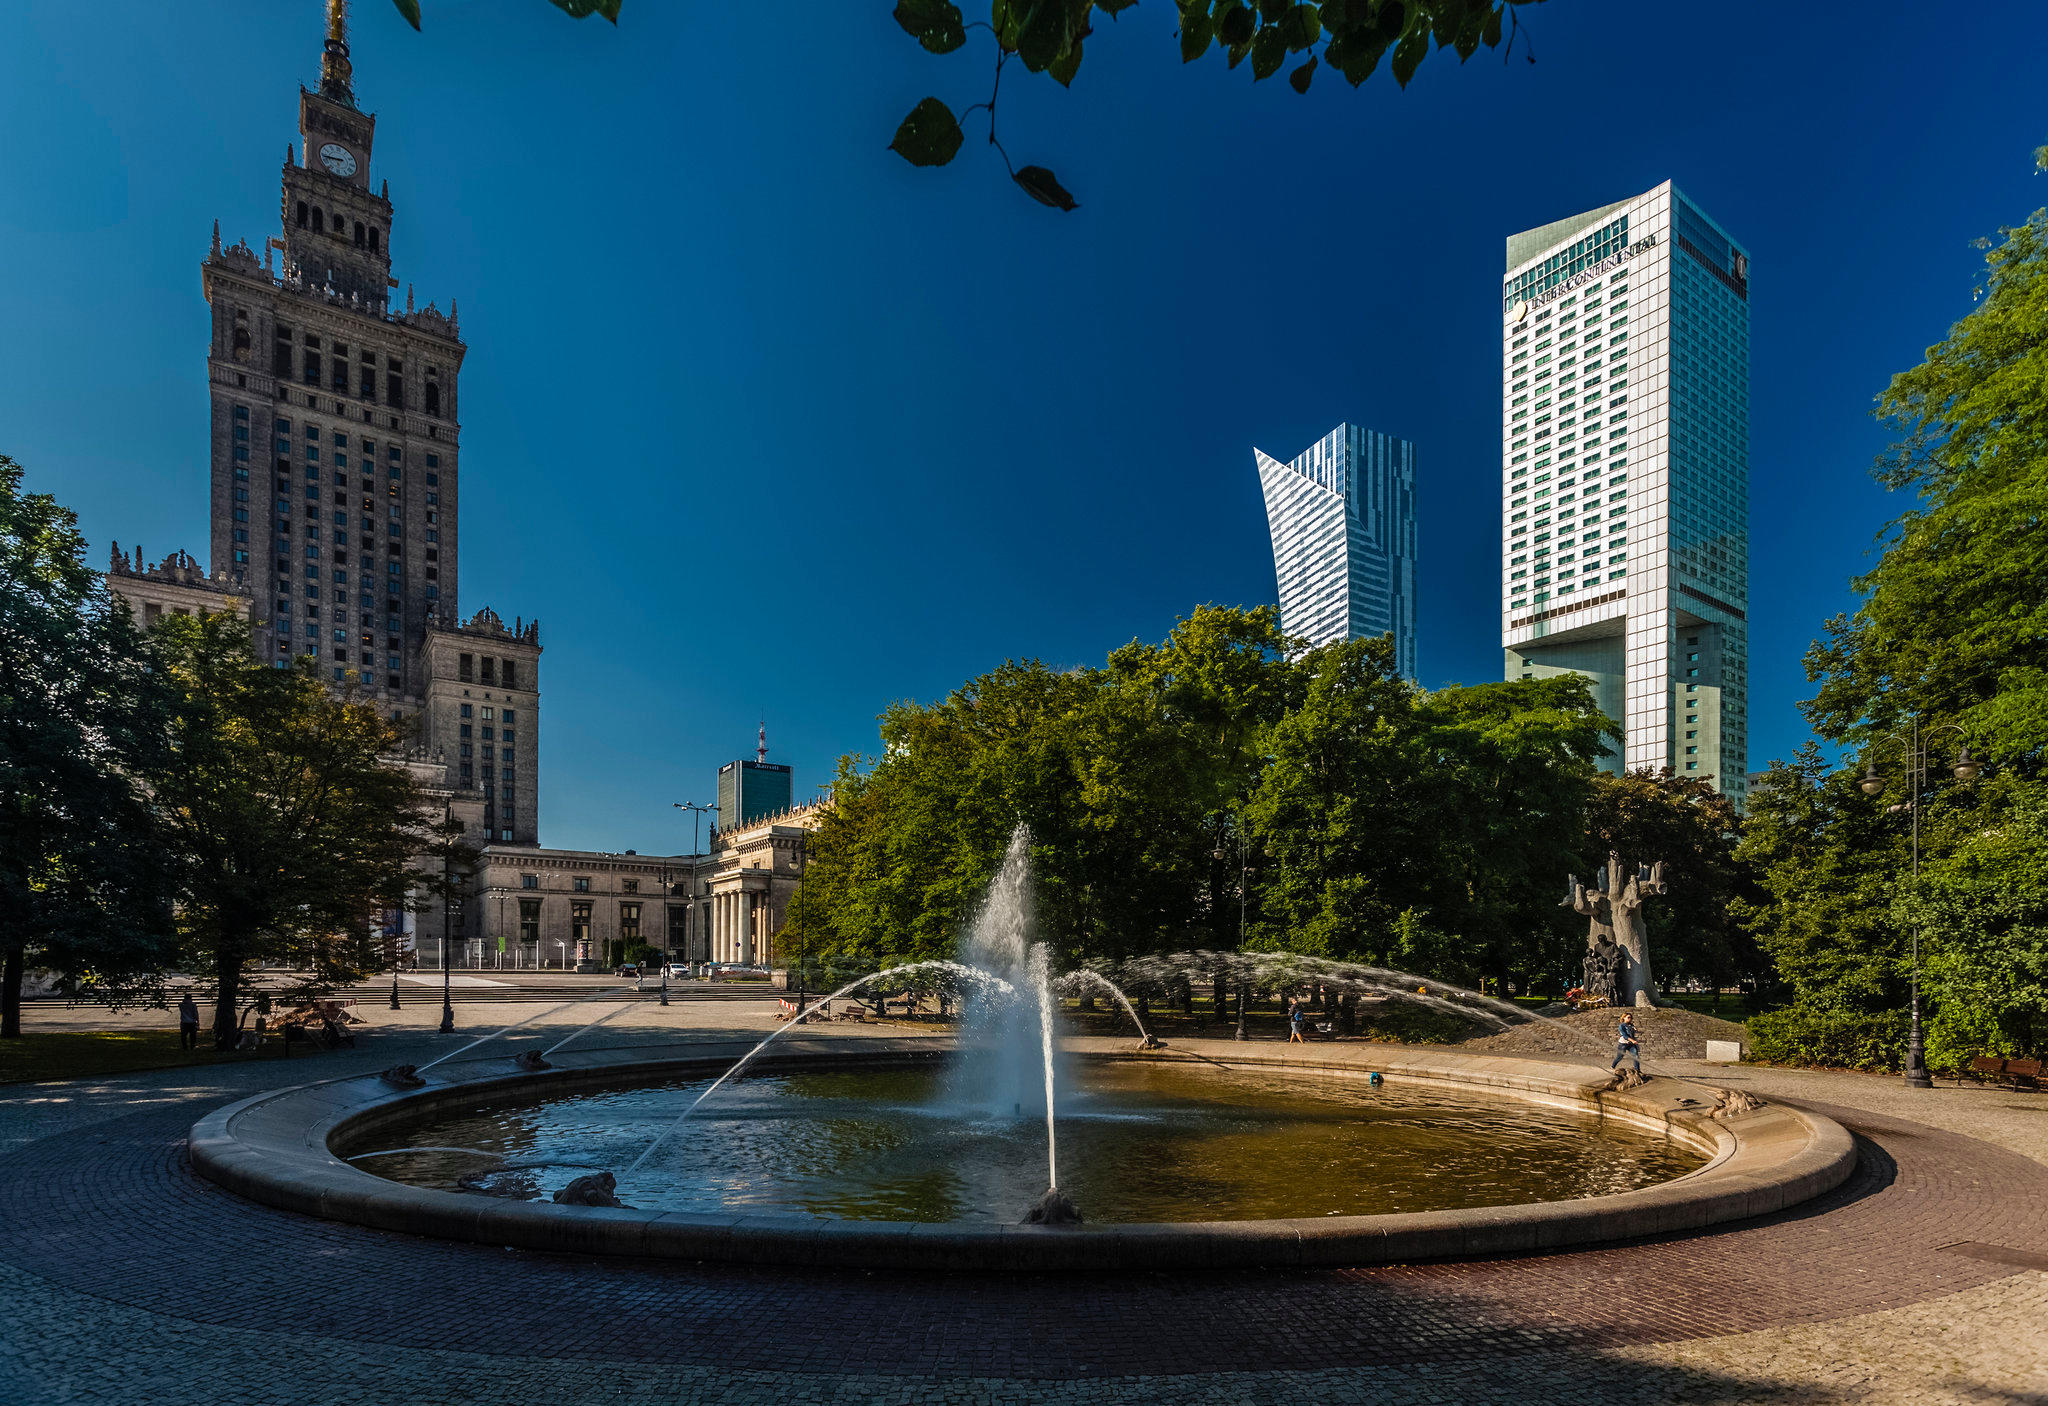 Images InterContinental Warsaw, an IHG Hotel